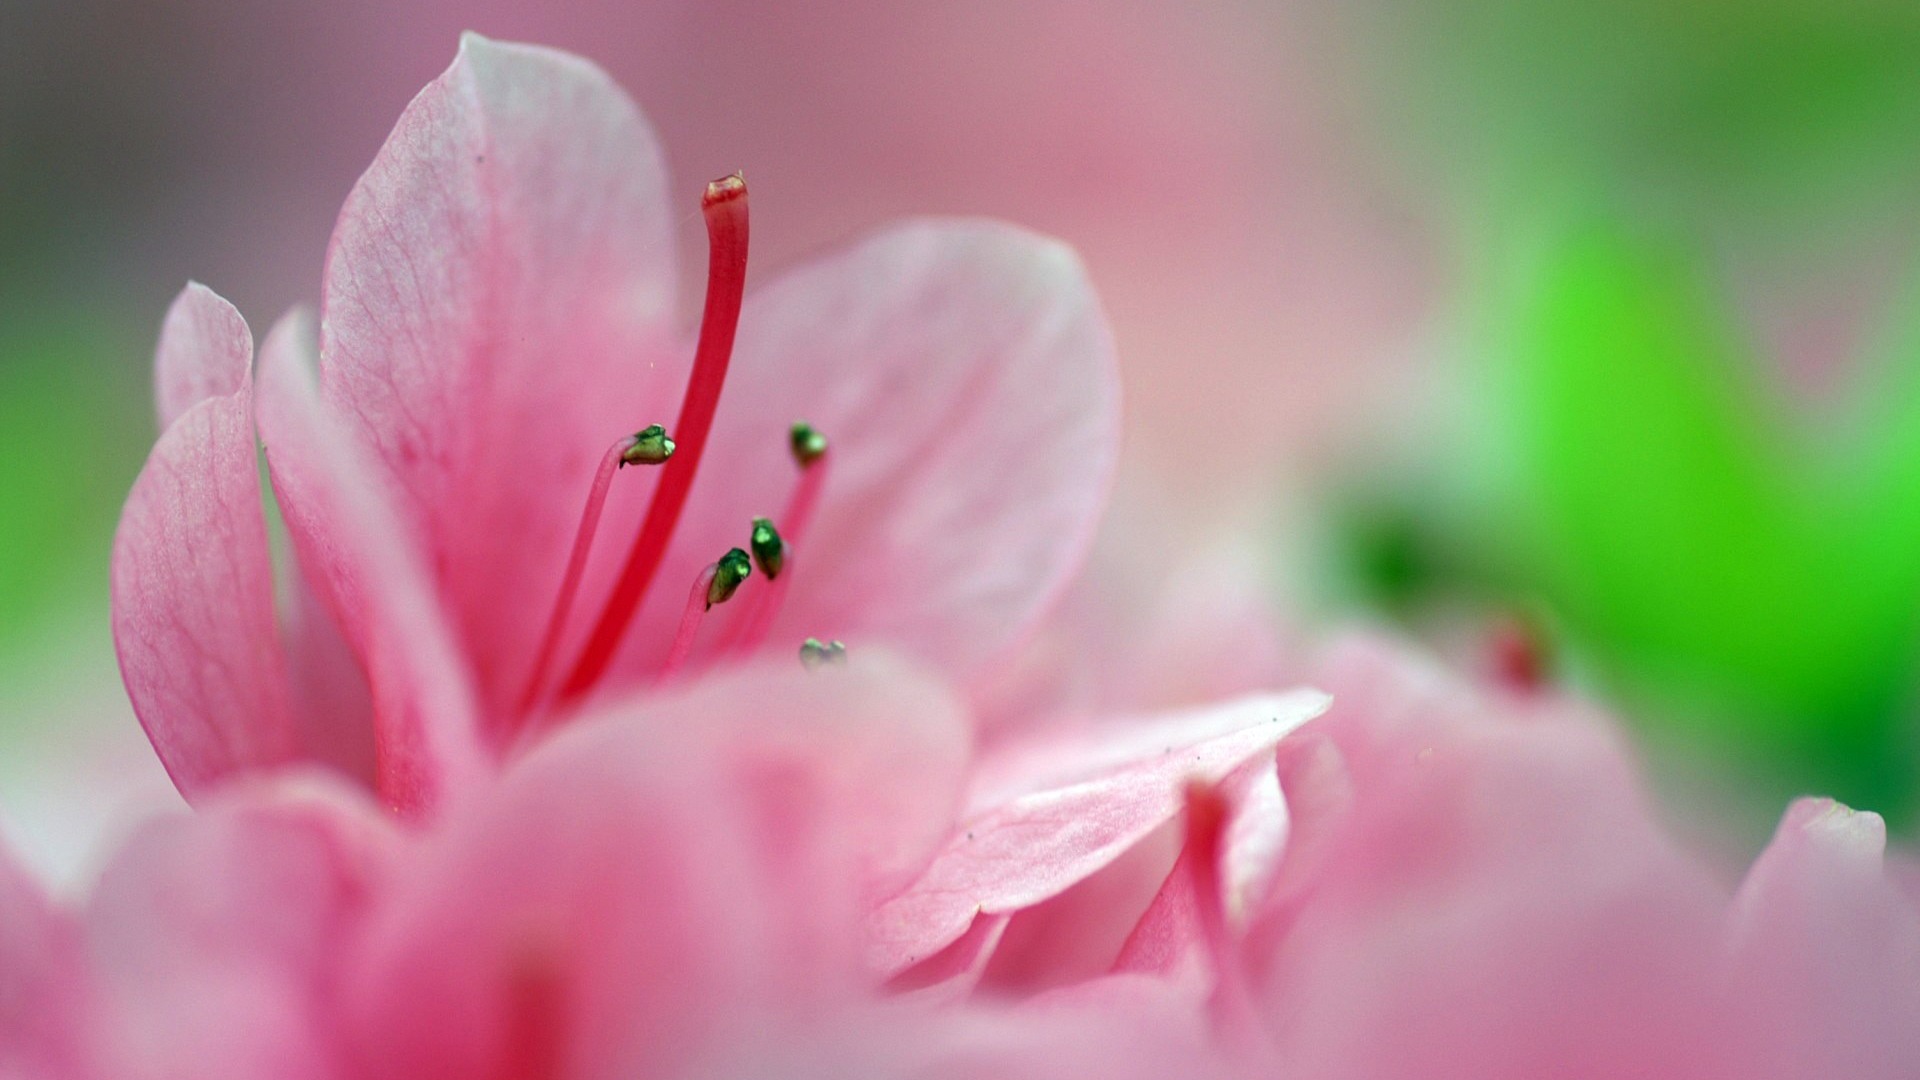 Personal Flowers HD Wallpapers #46 - 1920x1080